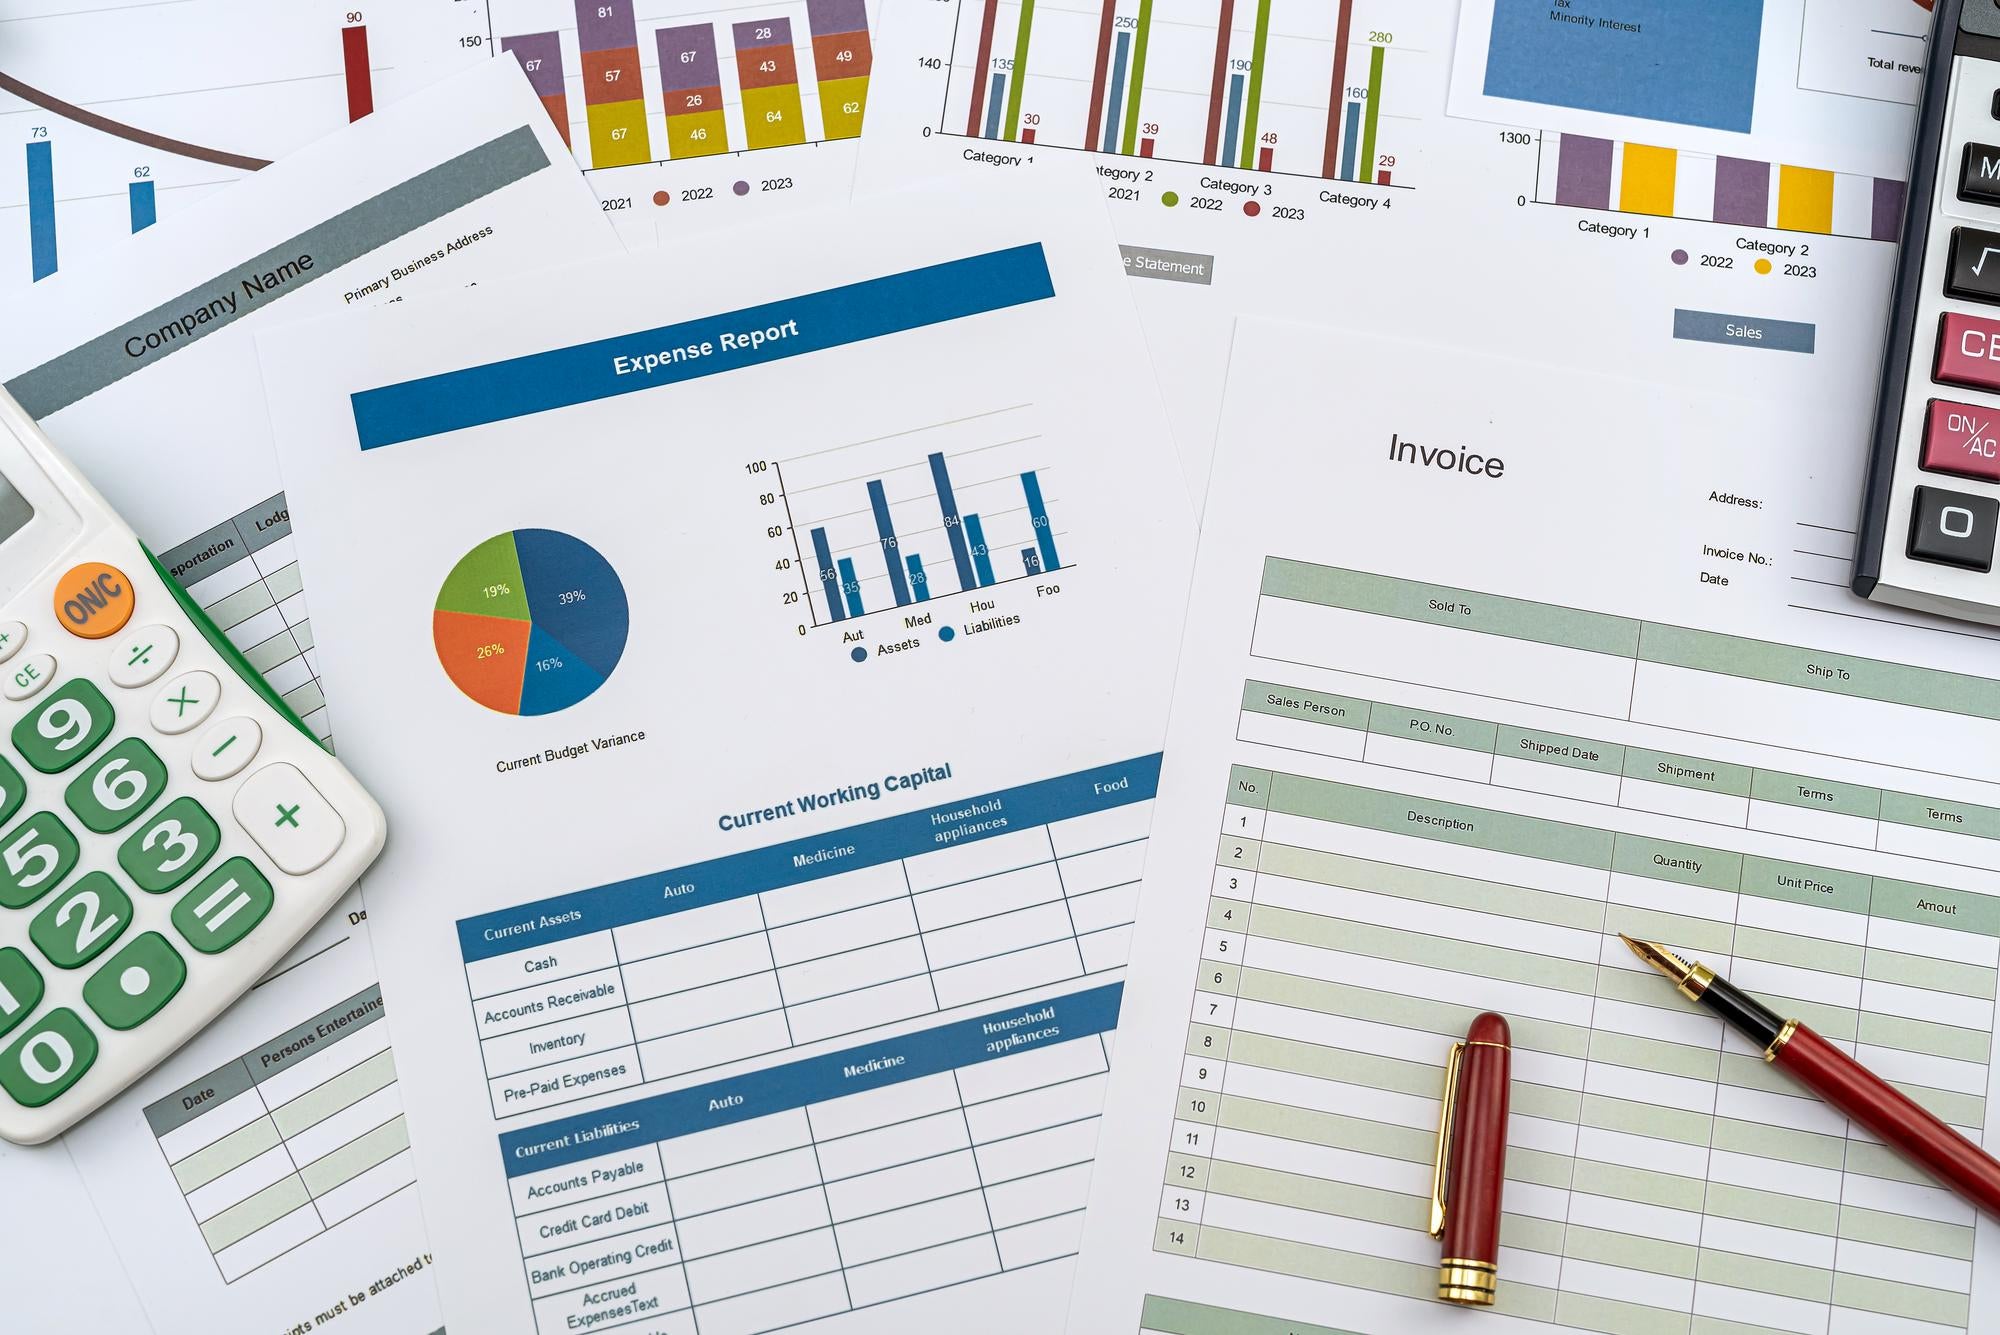 300+ Bundle Excel Templates - Business, Analytics, Project, Charts, Invoices, Lists, Budget and many more